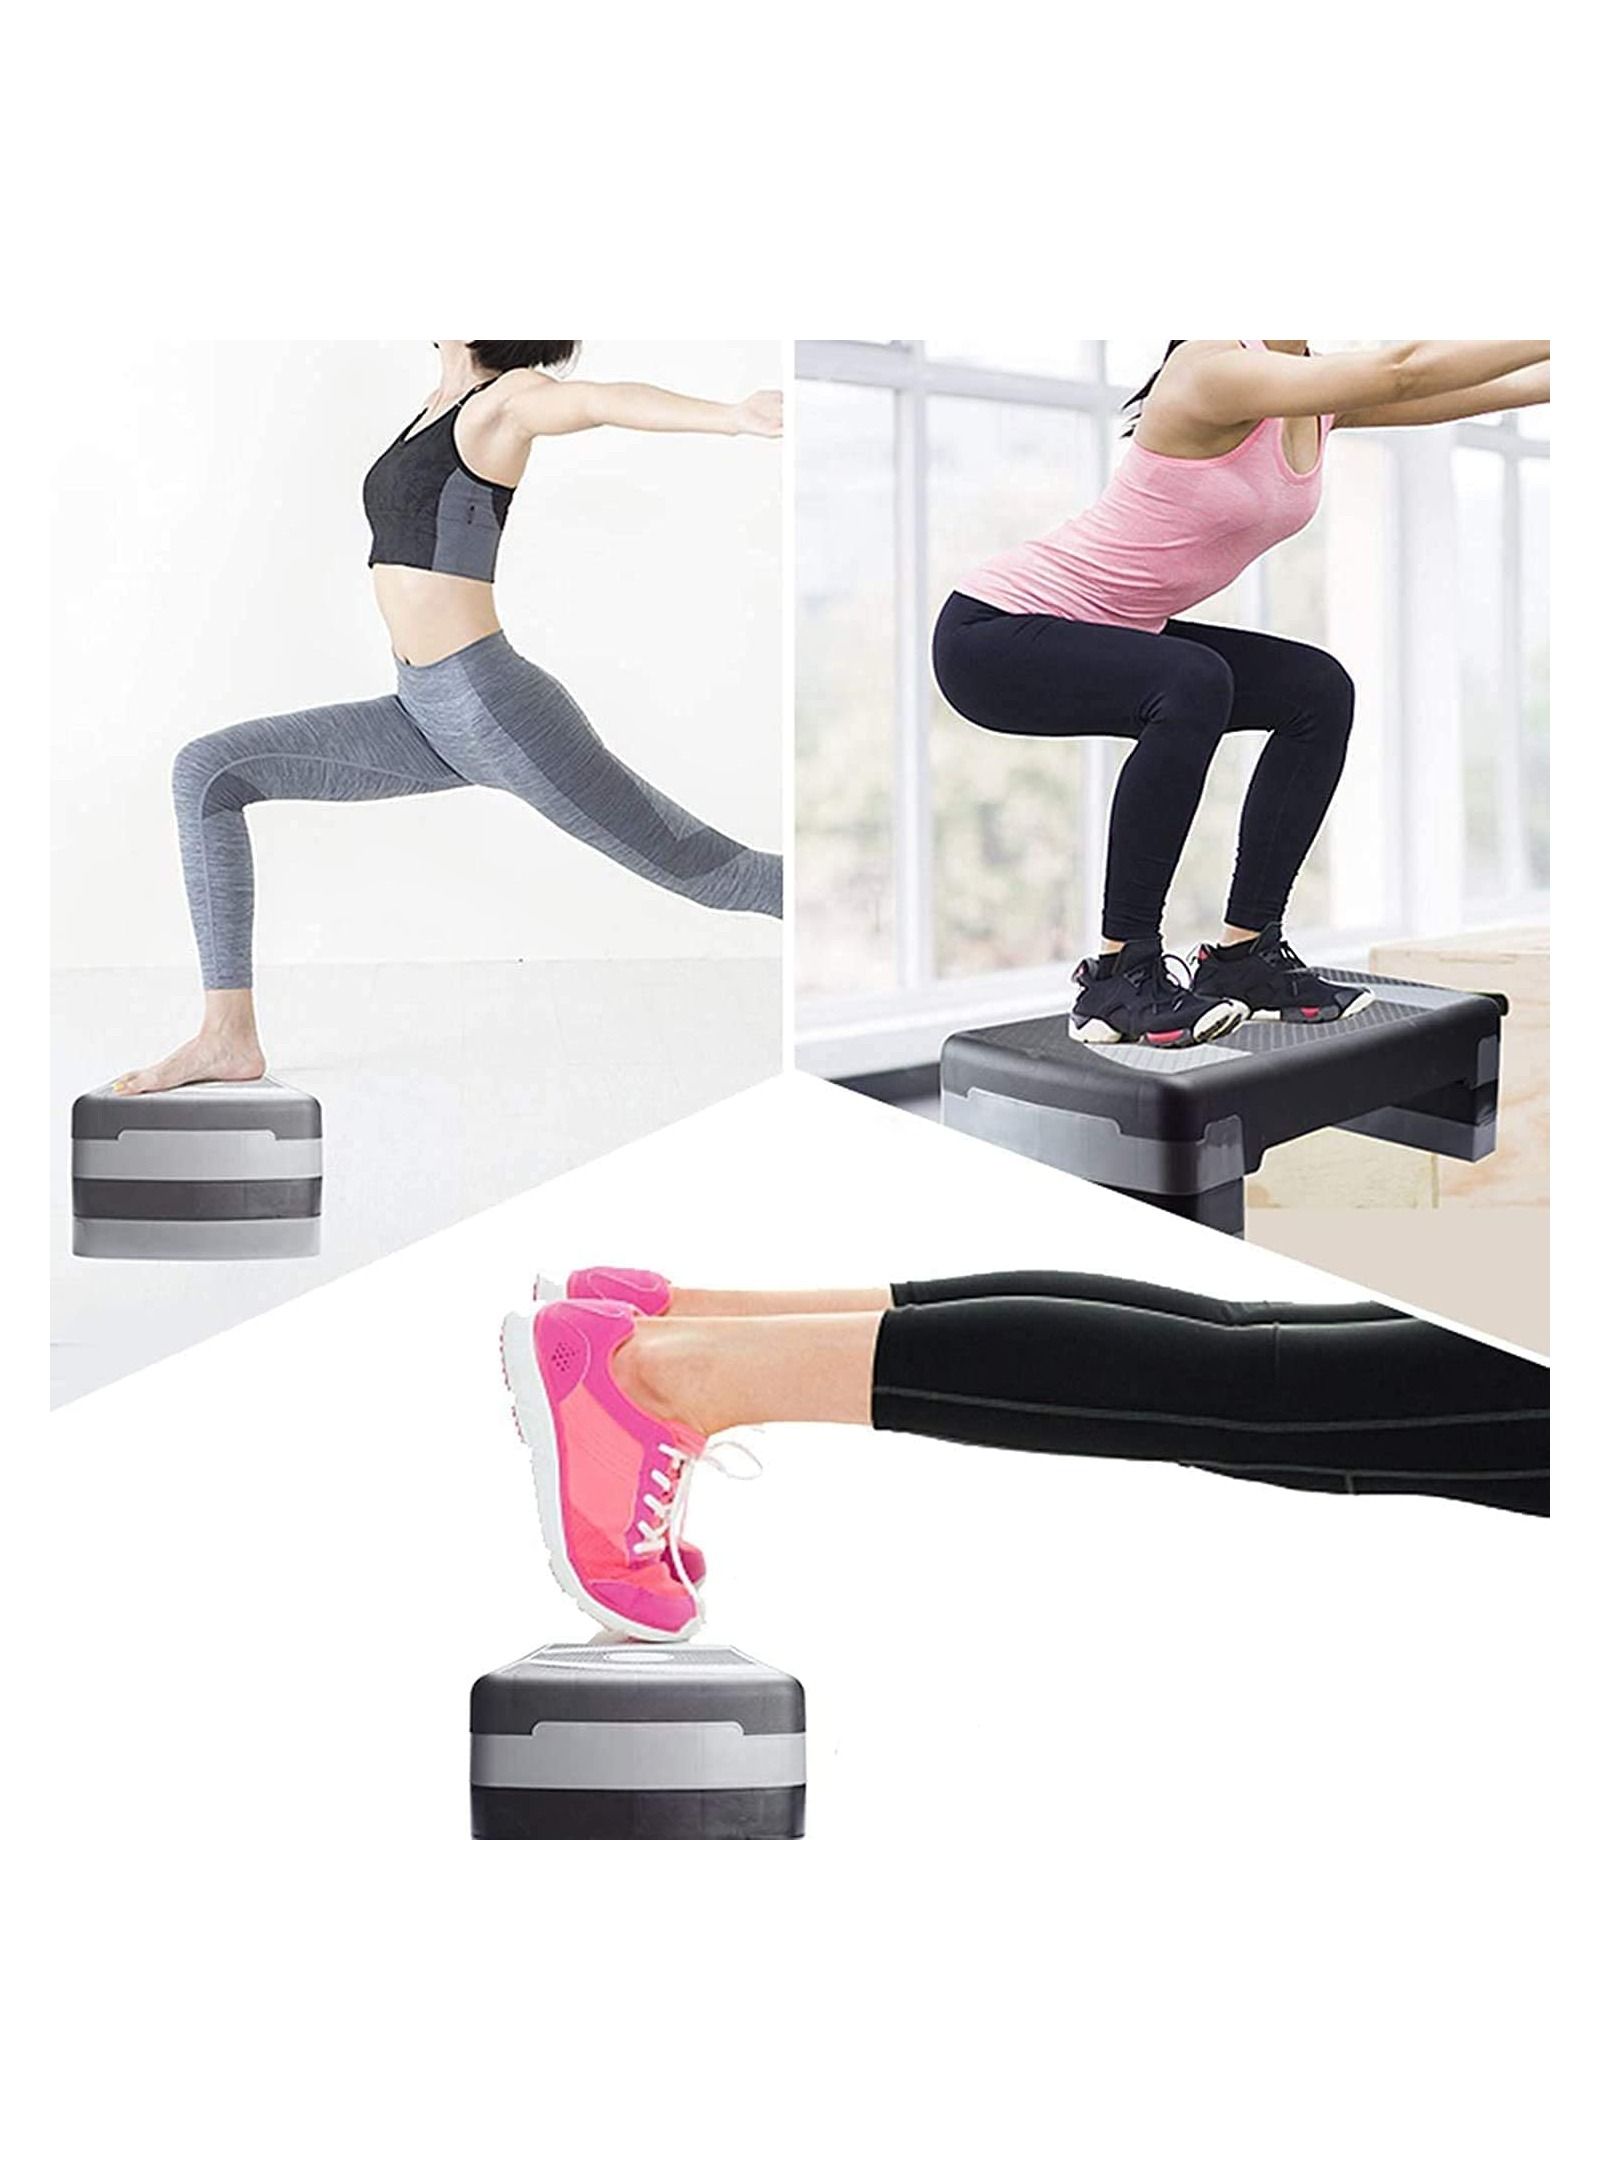 Aerobic Step, Adjustable Fitness Aerobic Step Non-Slip Cardio Yoga Pedal Stepper Home Gym Workout Exercise Equipment 